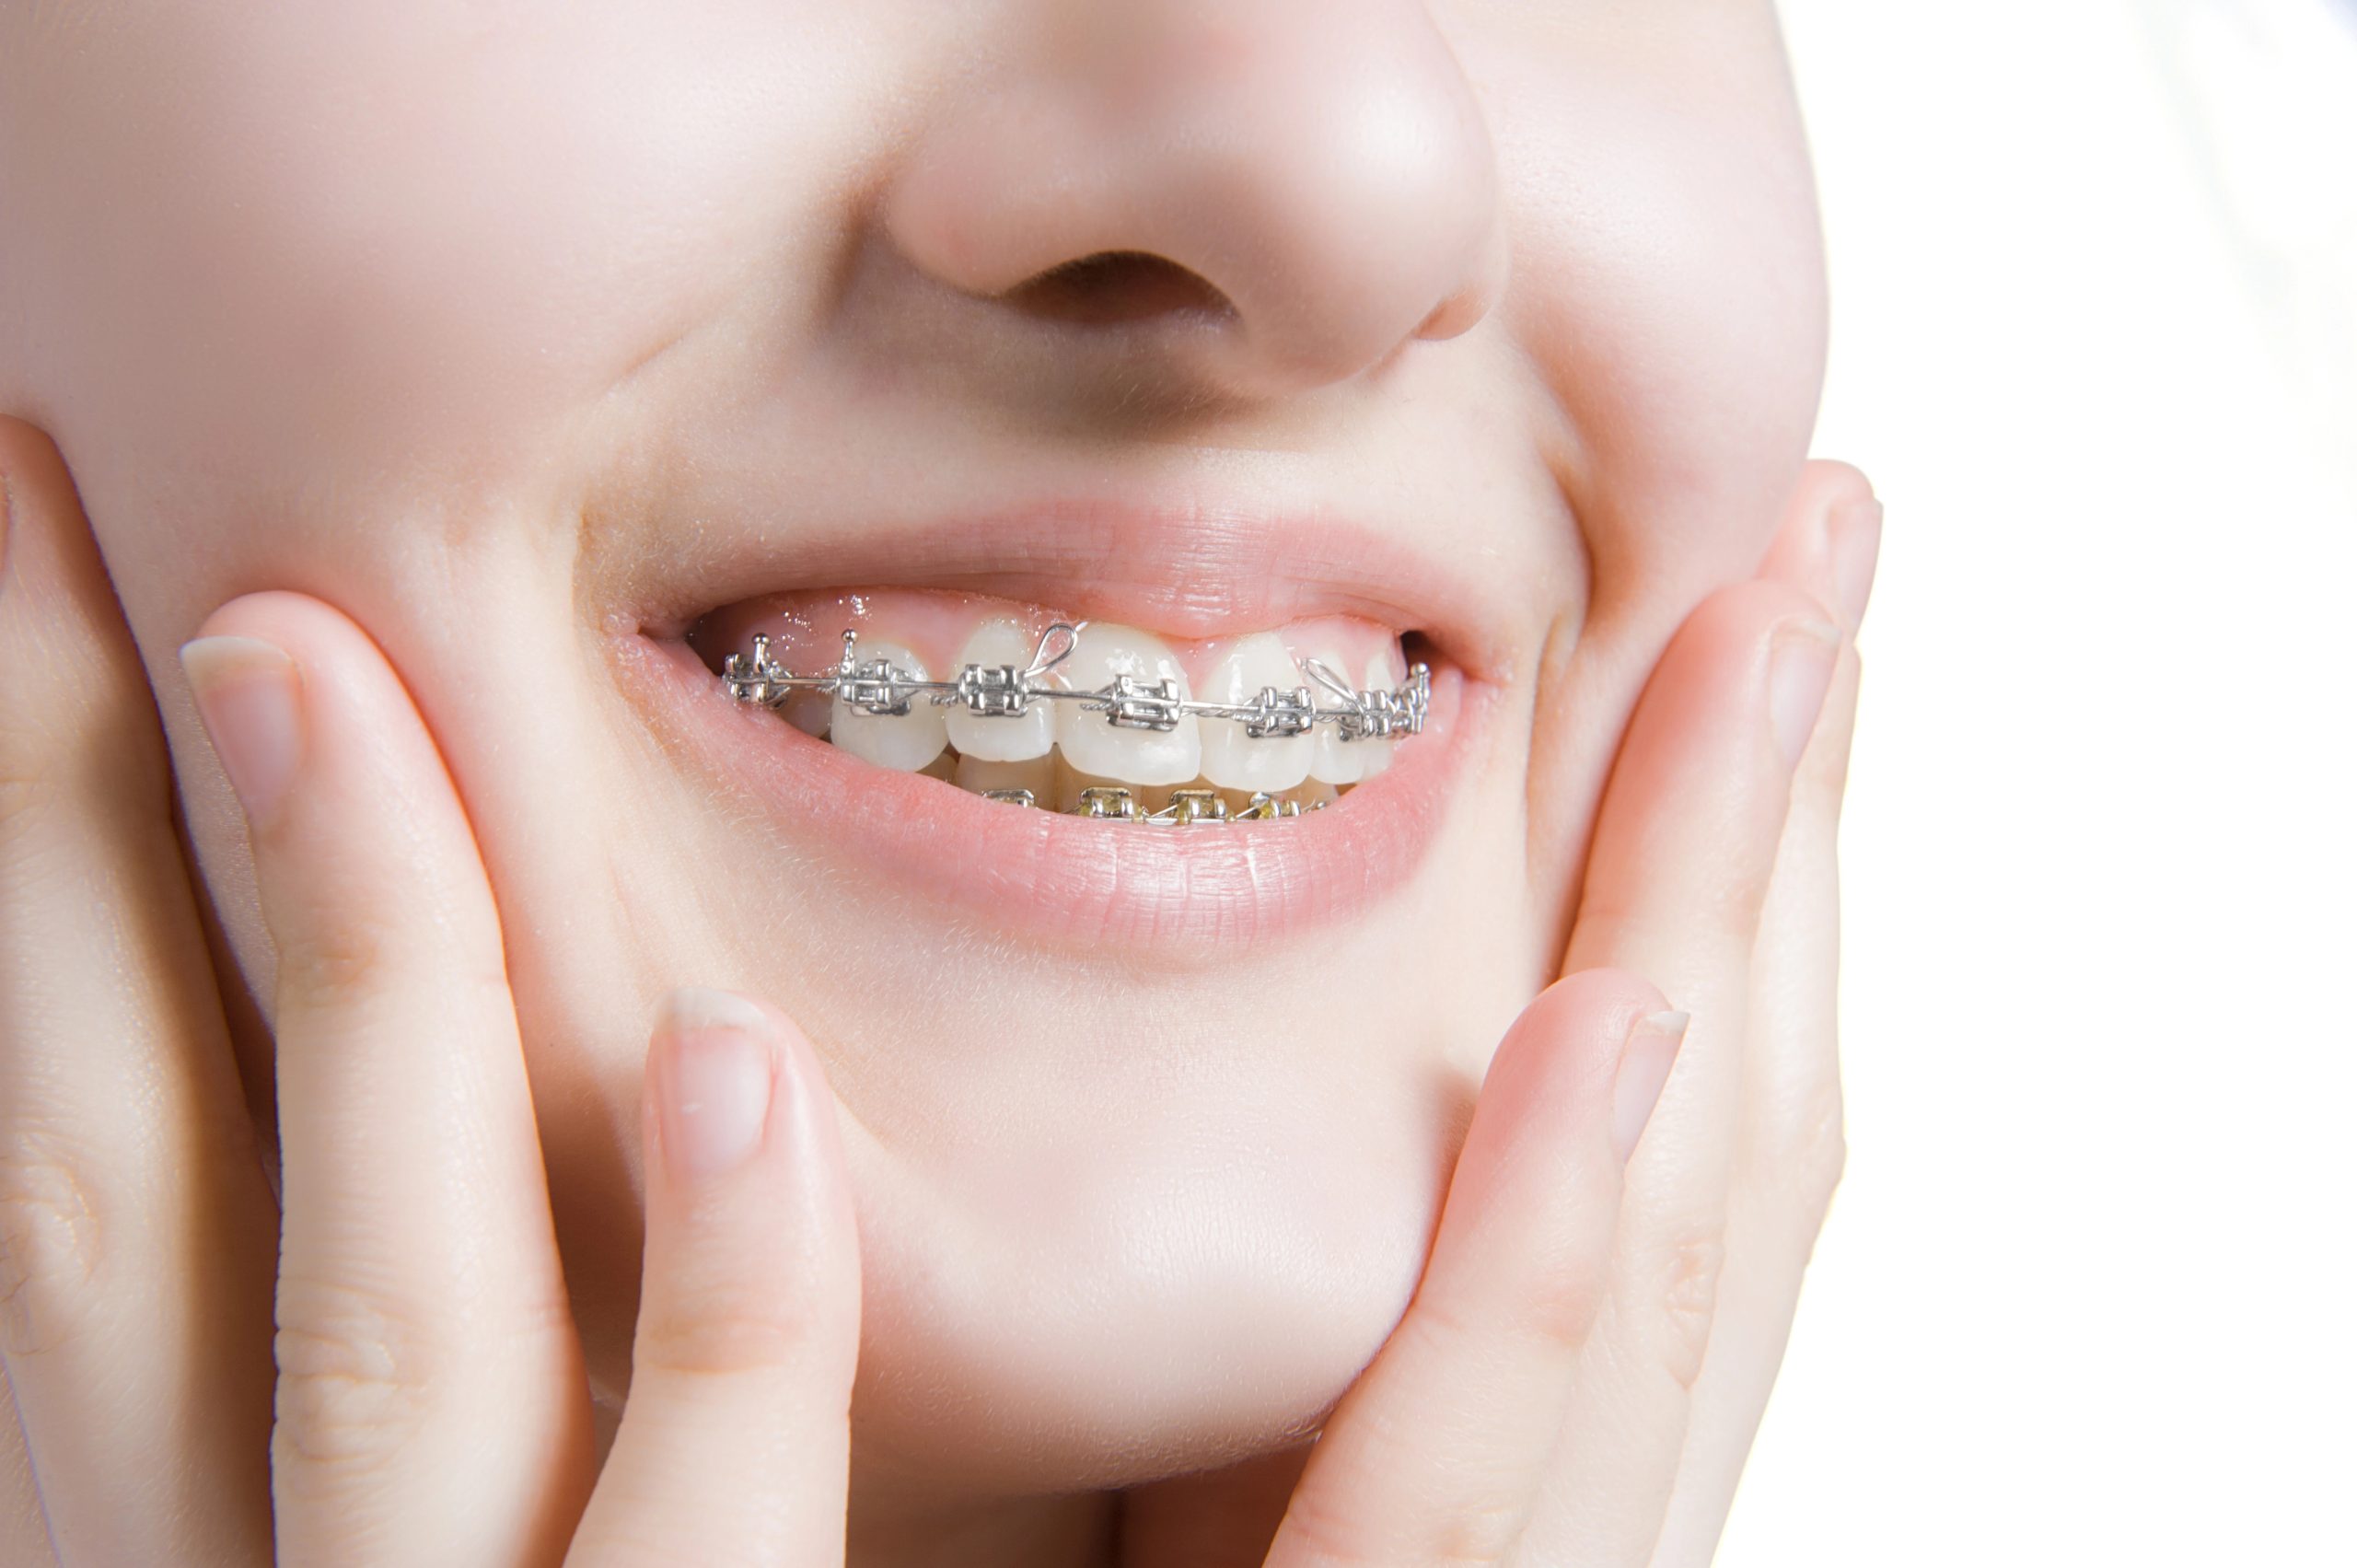 Mukwonago Braces: What To Know Before Getting Started